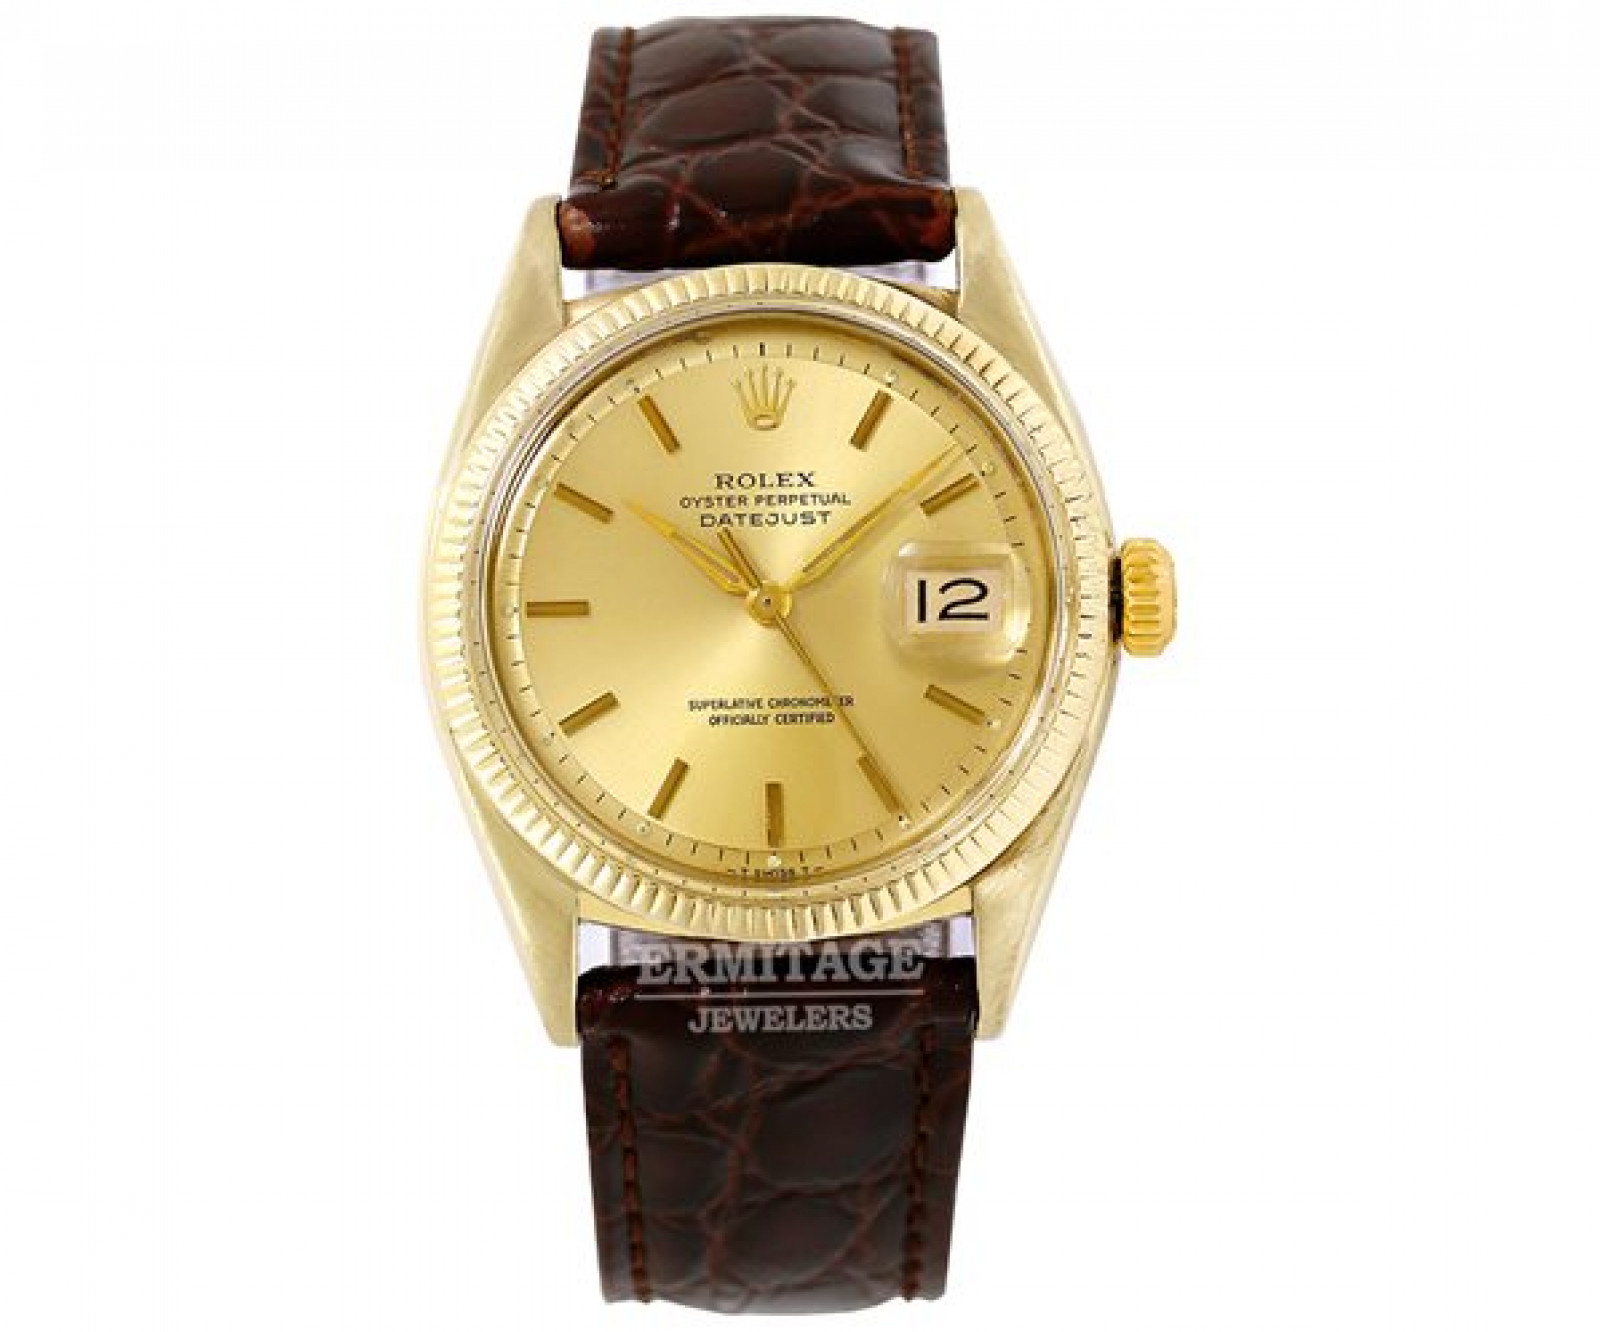 Vintage Rolex Oyster Perpetual Datejust 6605 Gold